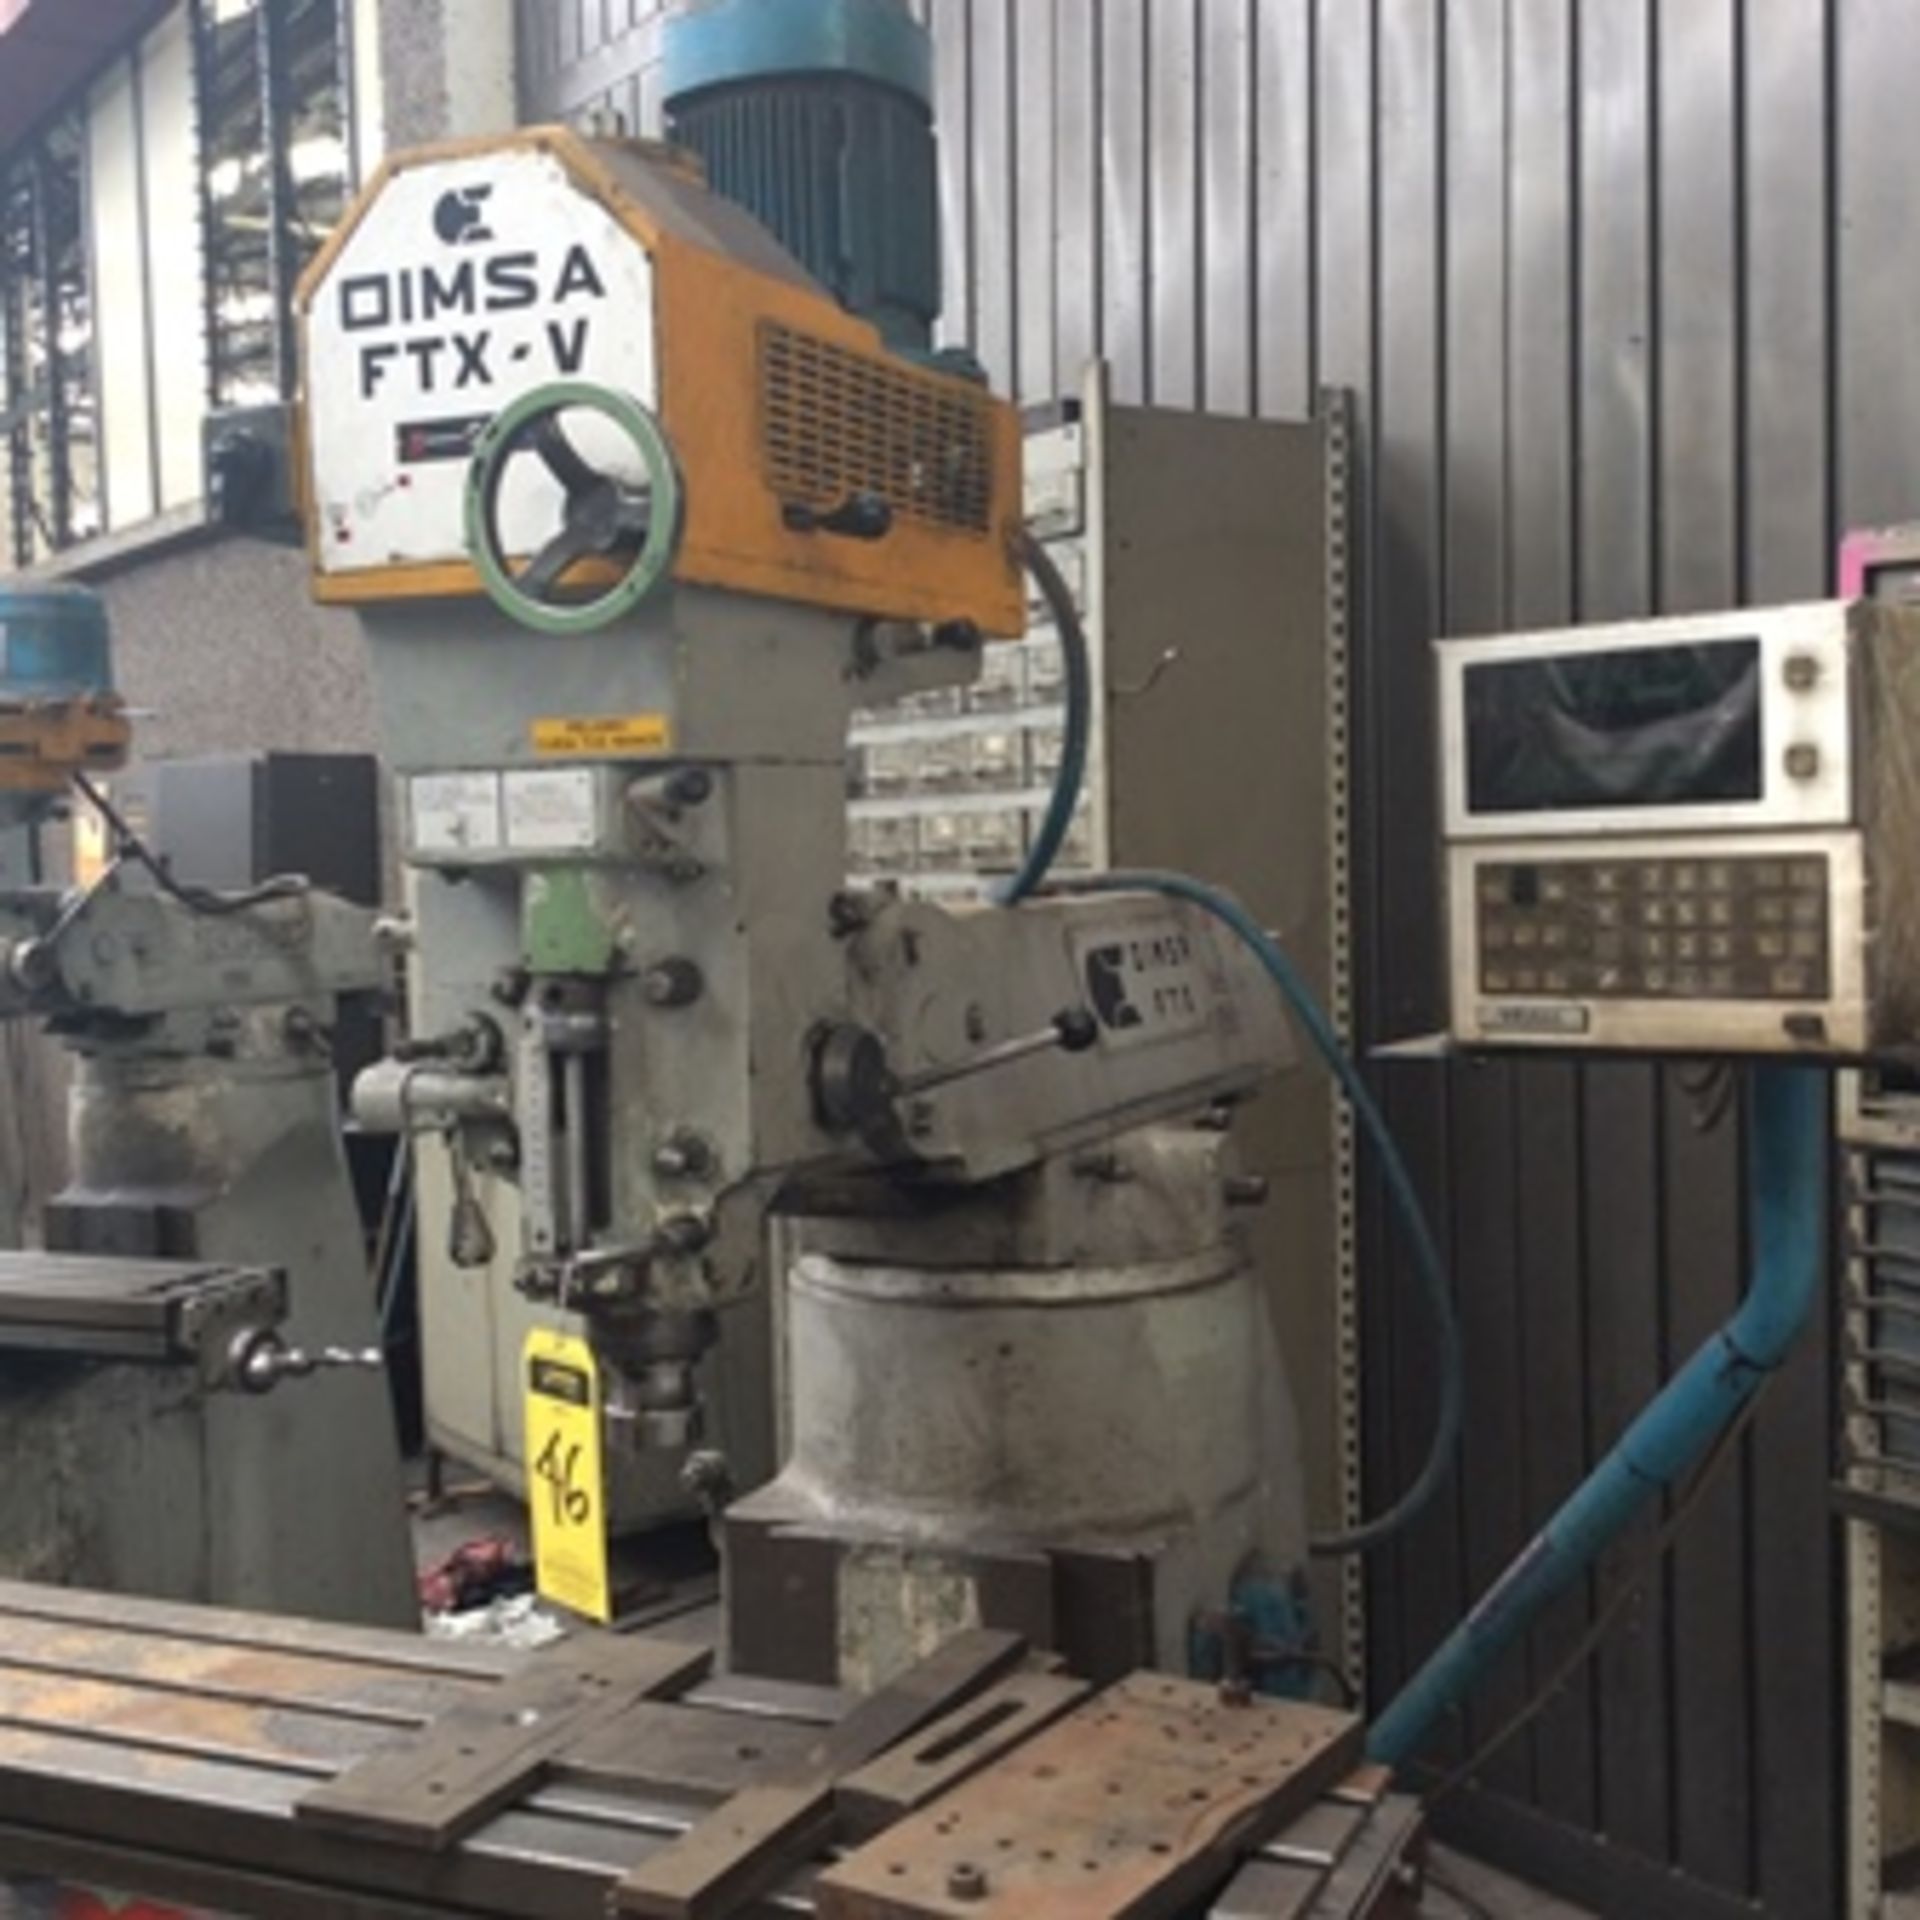 Oimsa milling machine model FTX-V series TM-07, includes Mitutoyo digital readout and bench of 1 … - Image 8 of 13